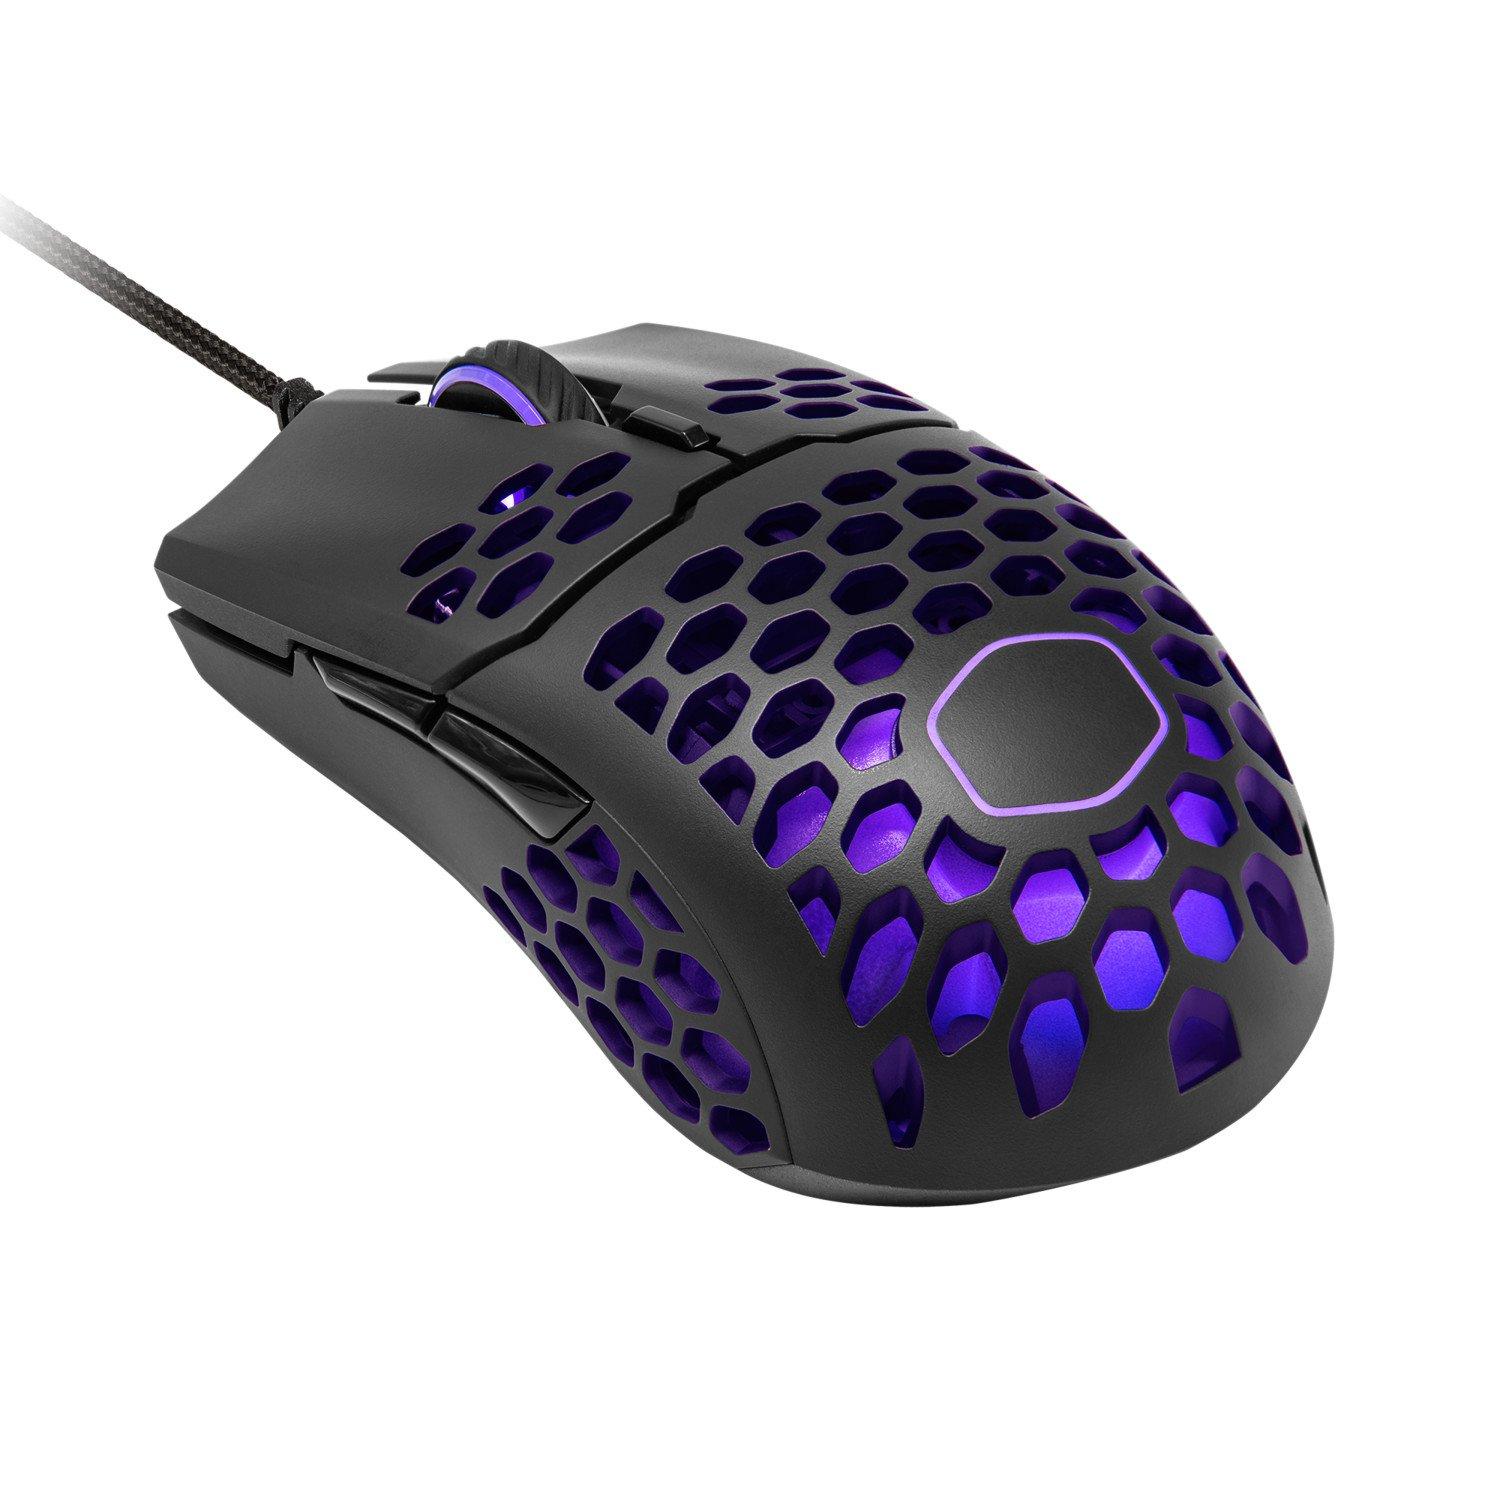 Cooler Master MM711 RGB Wired Gaming Mouse GameStop